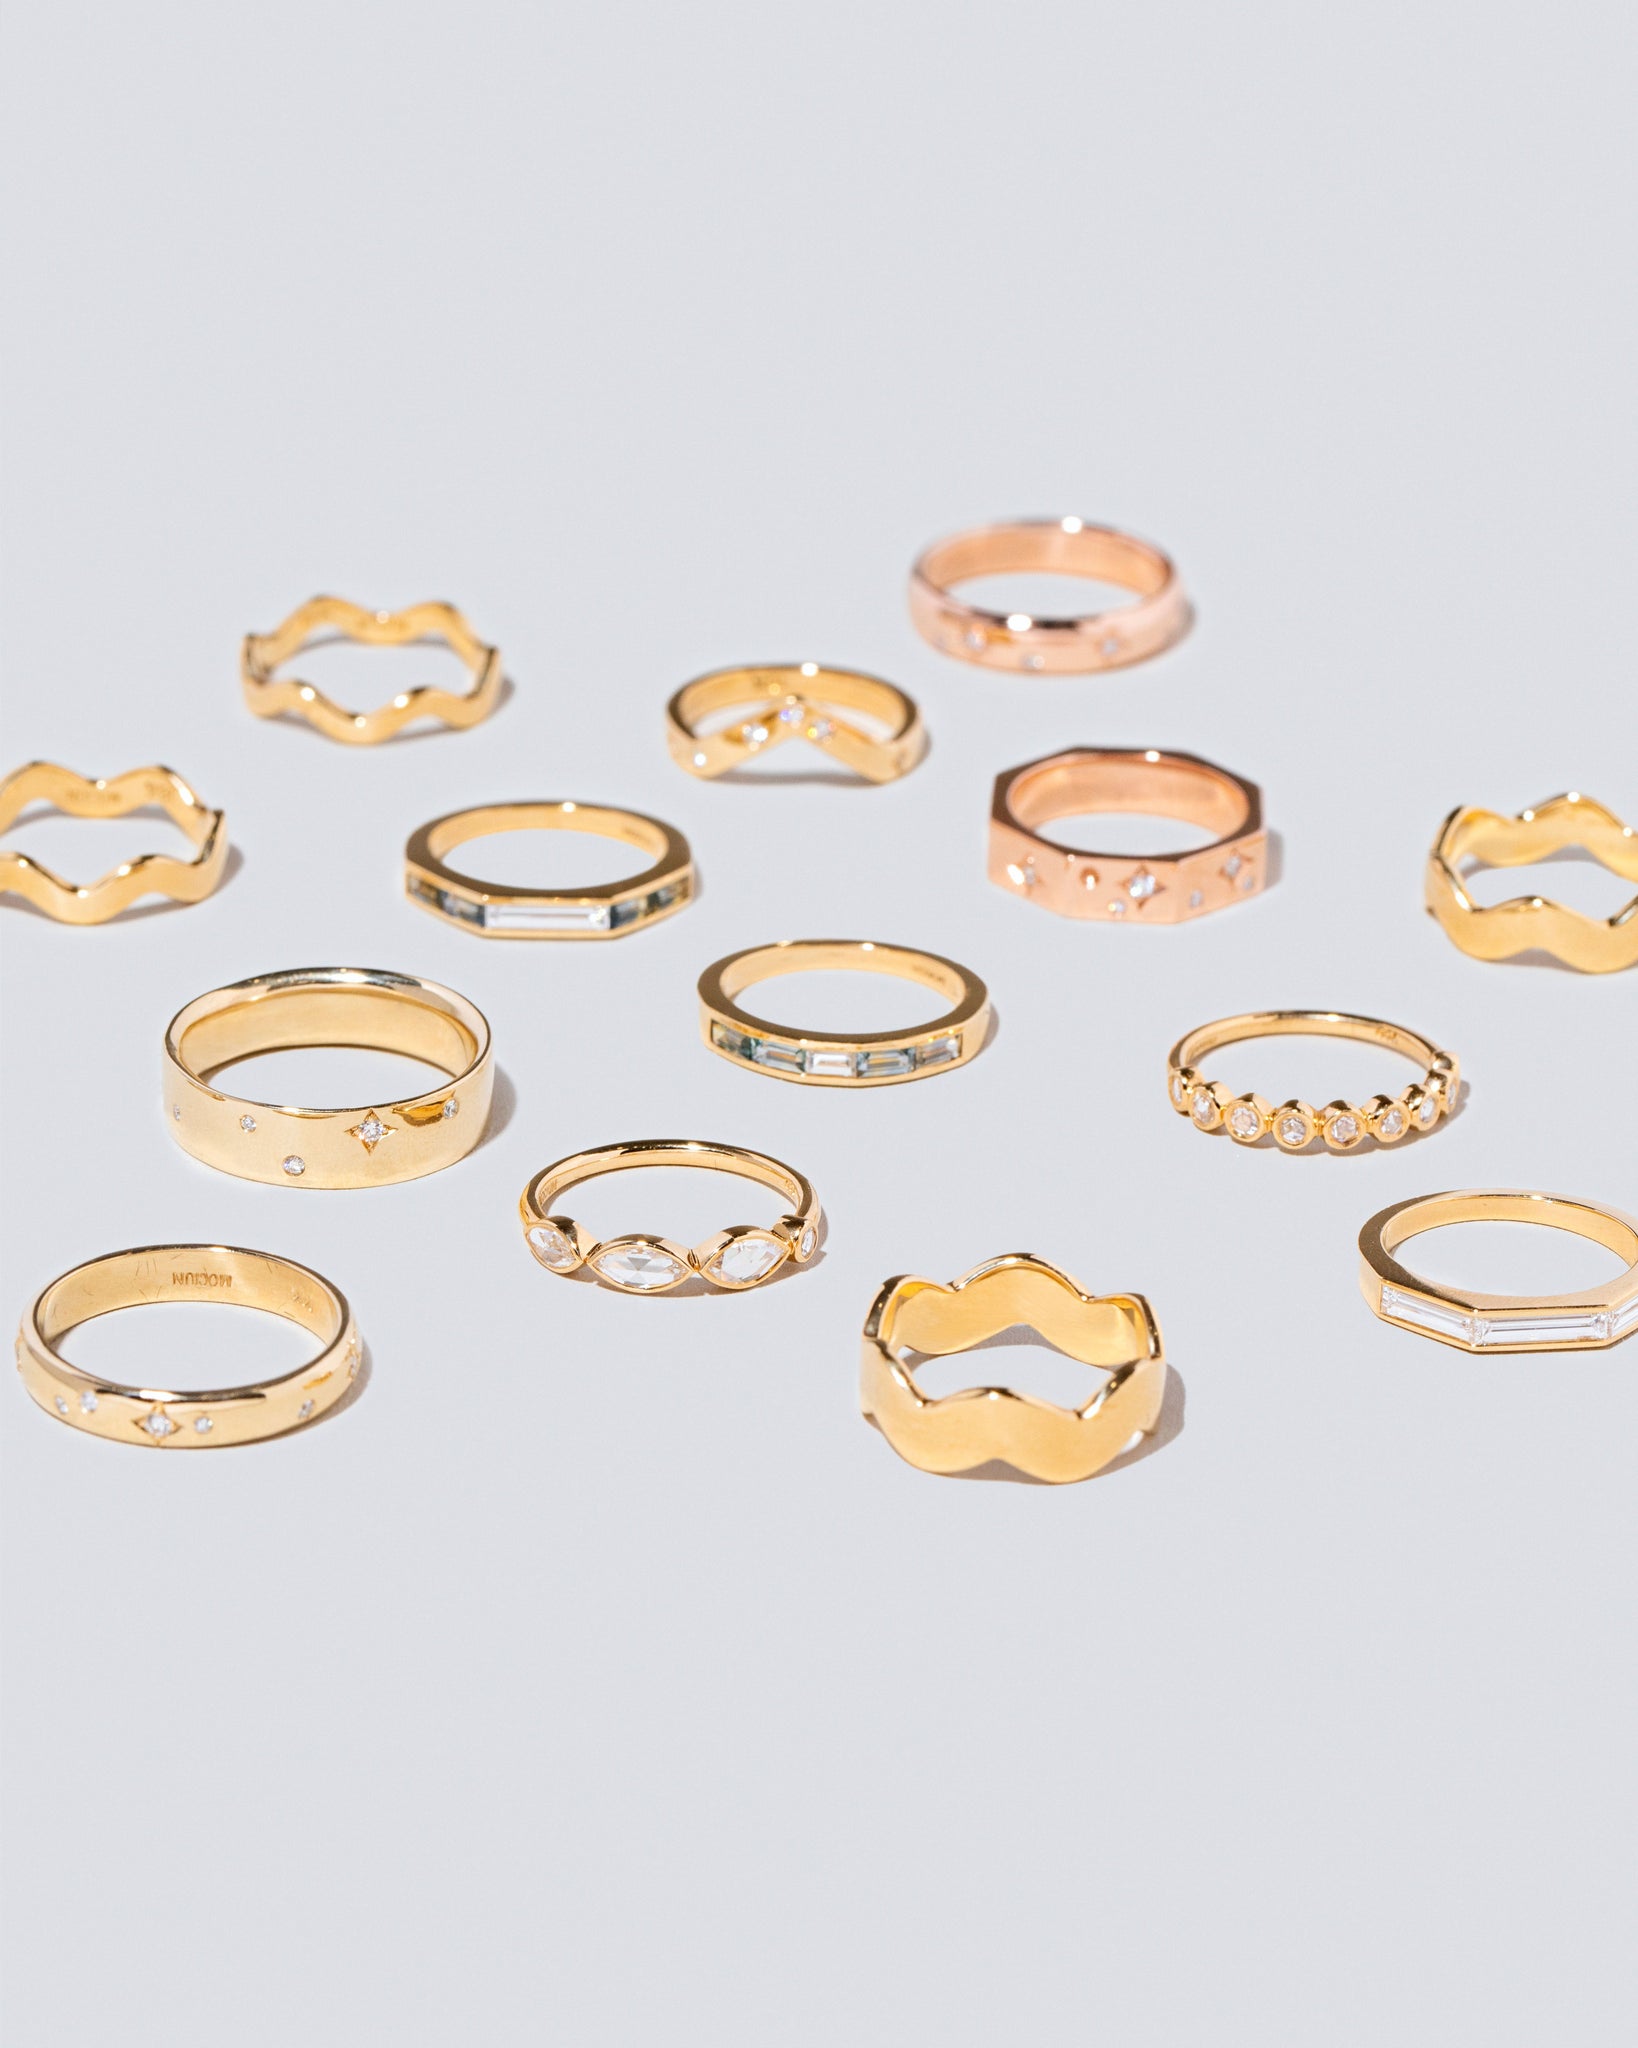 Group of Mociun Solid and Gemstone Wedding Bands and Stacking Rings of varying styles and gemstones on light color surface.